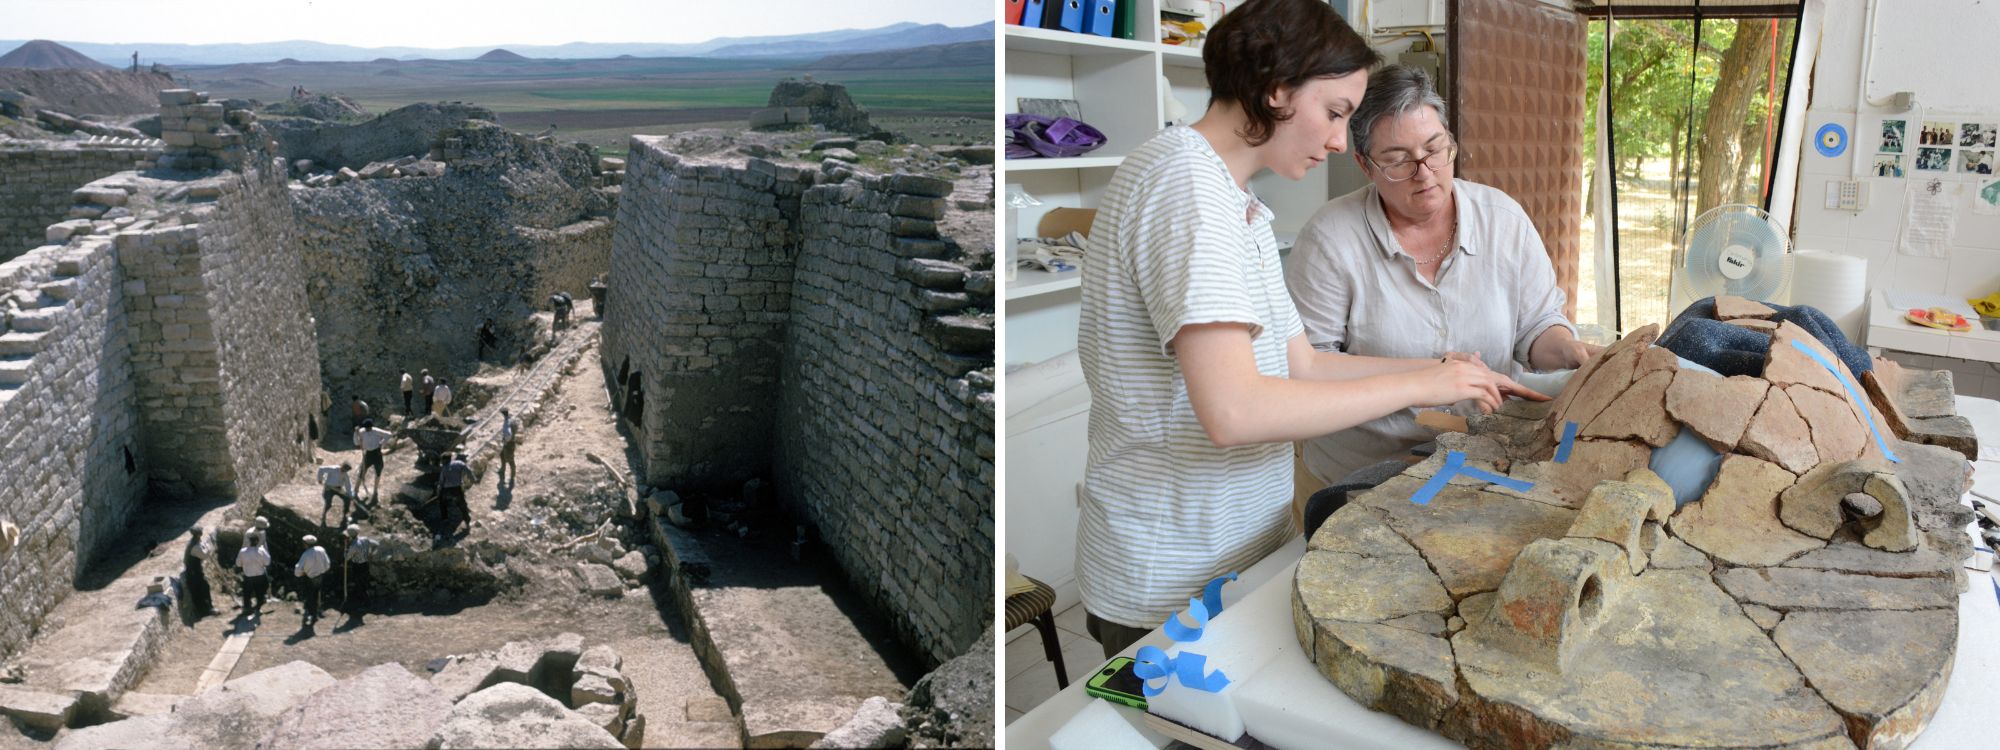 Left: The Gordion excavation site. Right: Two archaeologists examining an ancient piece of pottery.